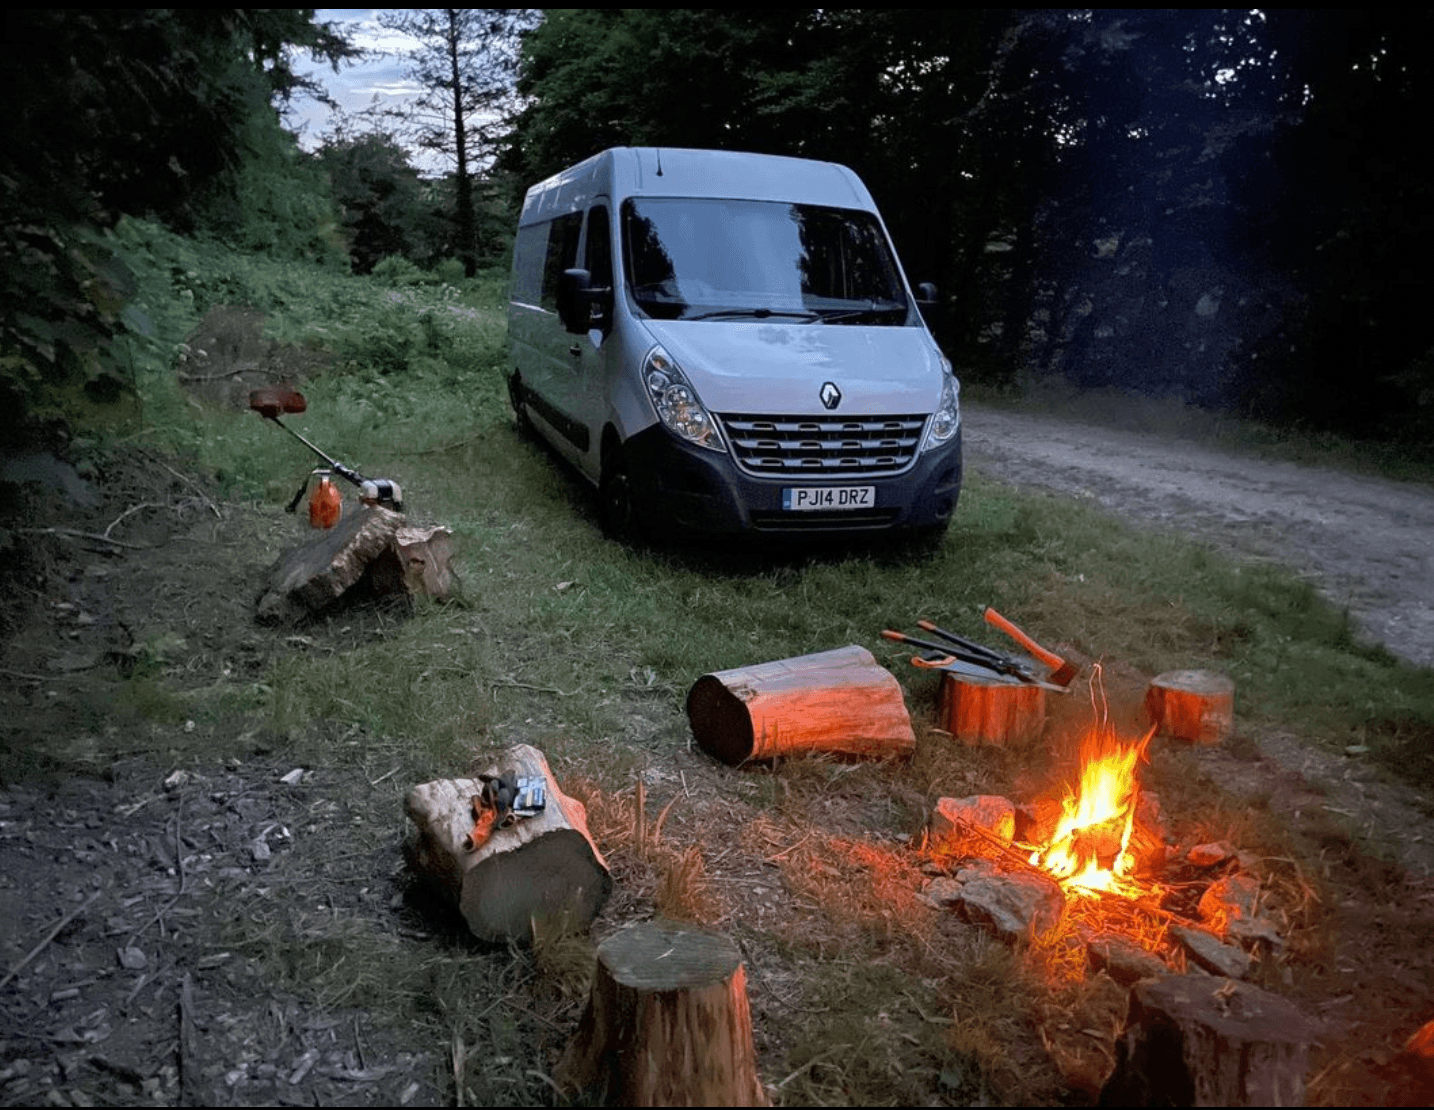 Large rental camper van in the woods, with a fire circle.